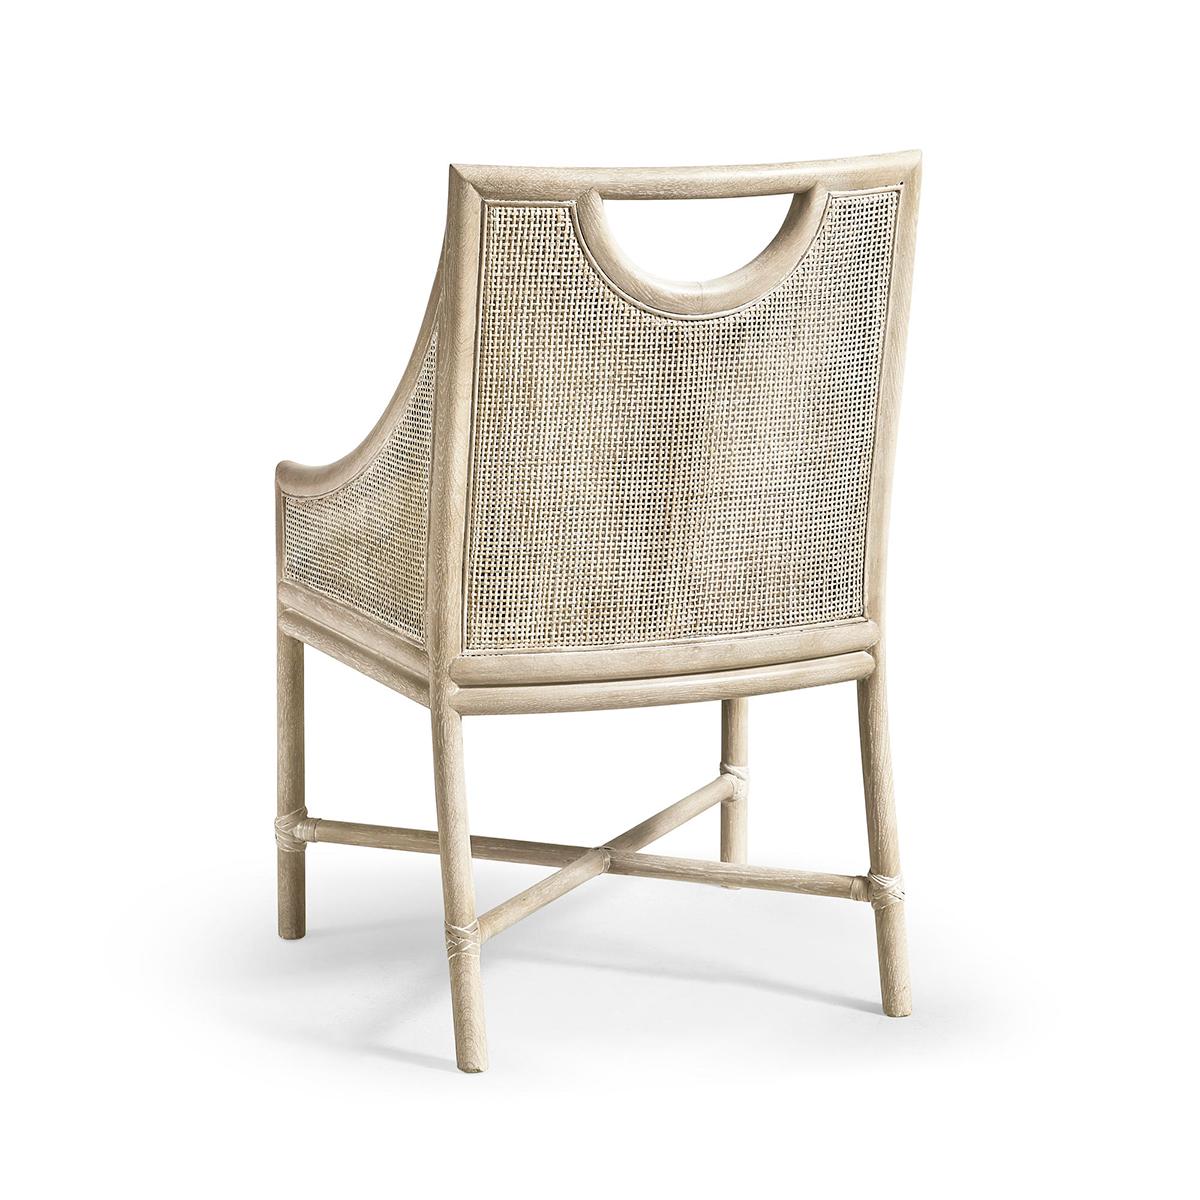 Designed to enhance any dining space, this chair features a solid oak frame, beautifully adorned with classic cane detailing that adds a layer of natural beauty and texture.

The use of oak and cane not only ensures durability but also contributes